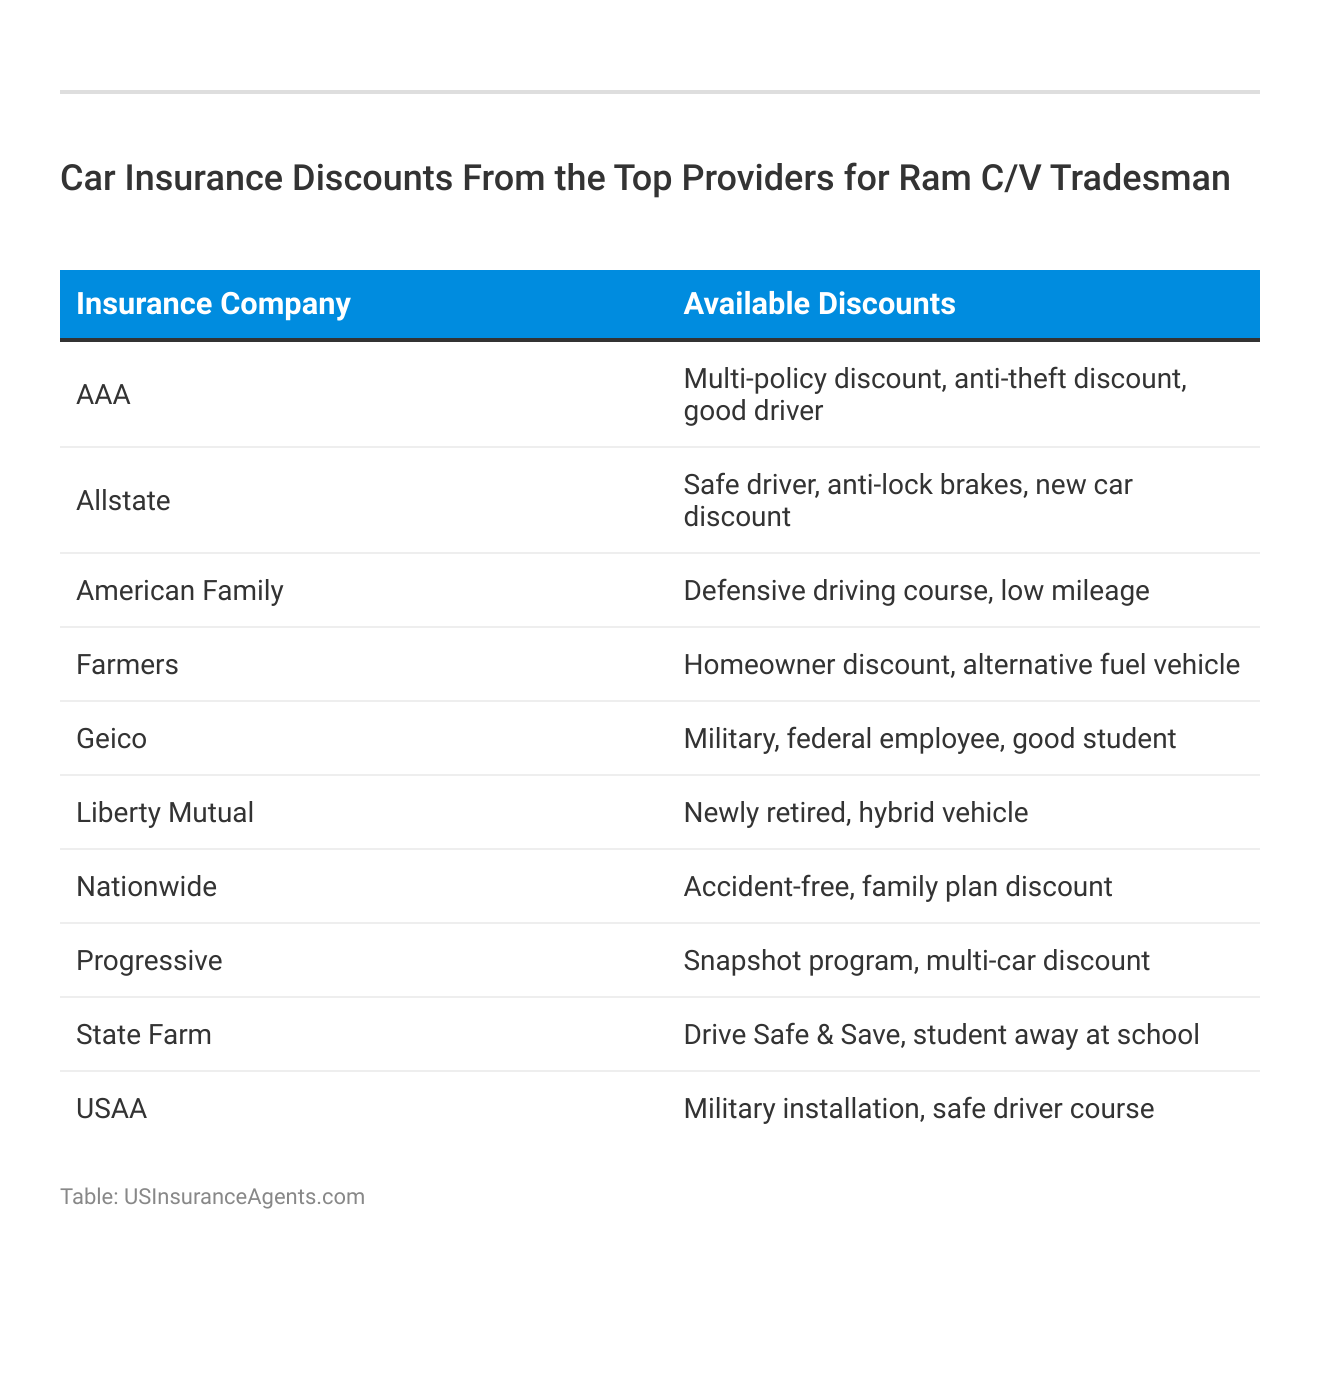 <h3>Car Insurance Discounts From the Top Providers for Ram C/V Tradesman</h3>